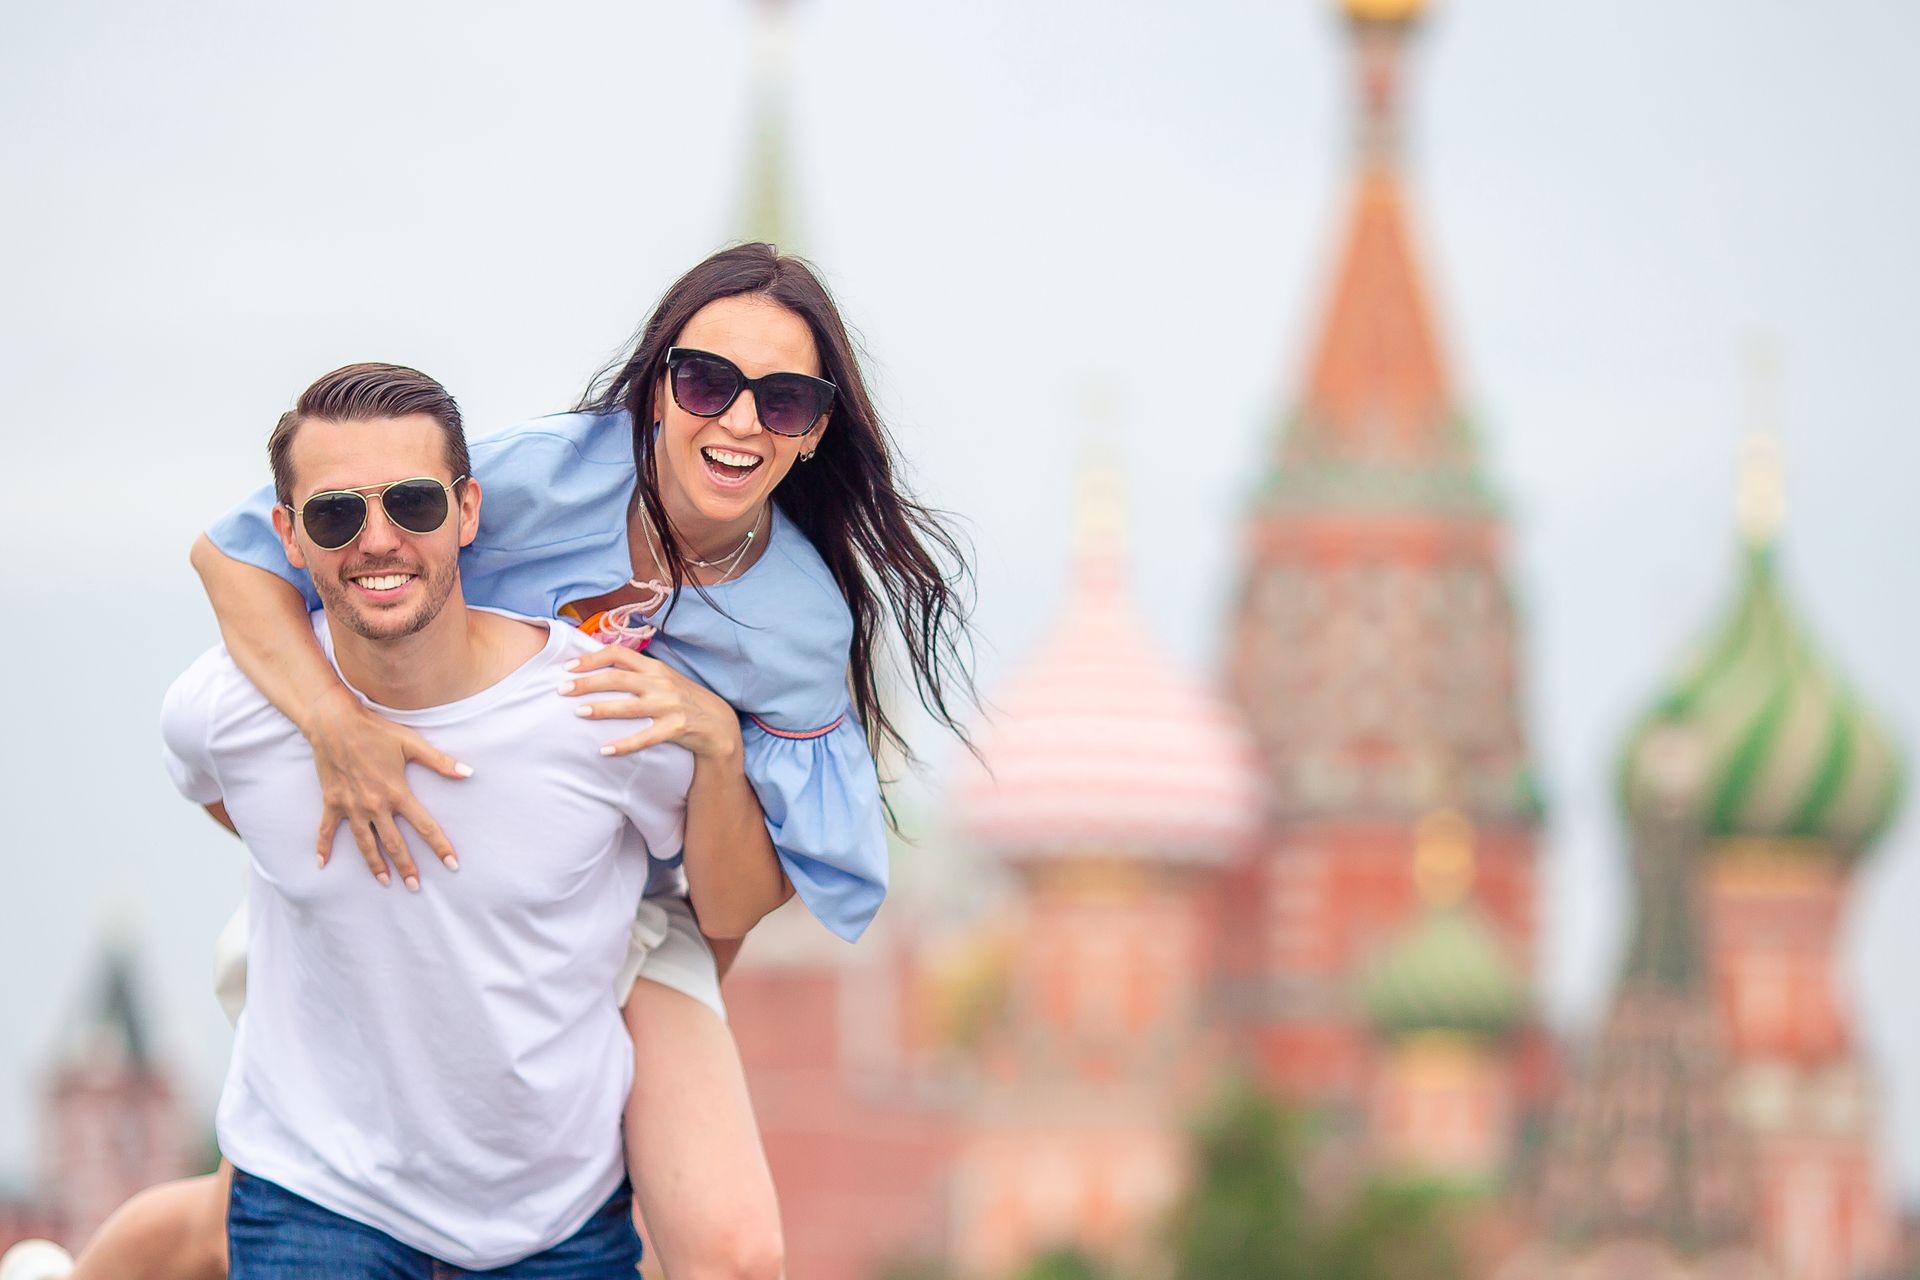 Young dating couple in love walking in city. Portrait of a happy romantic couple outdoors in Moscow city